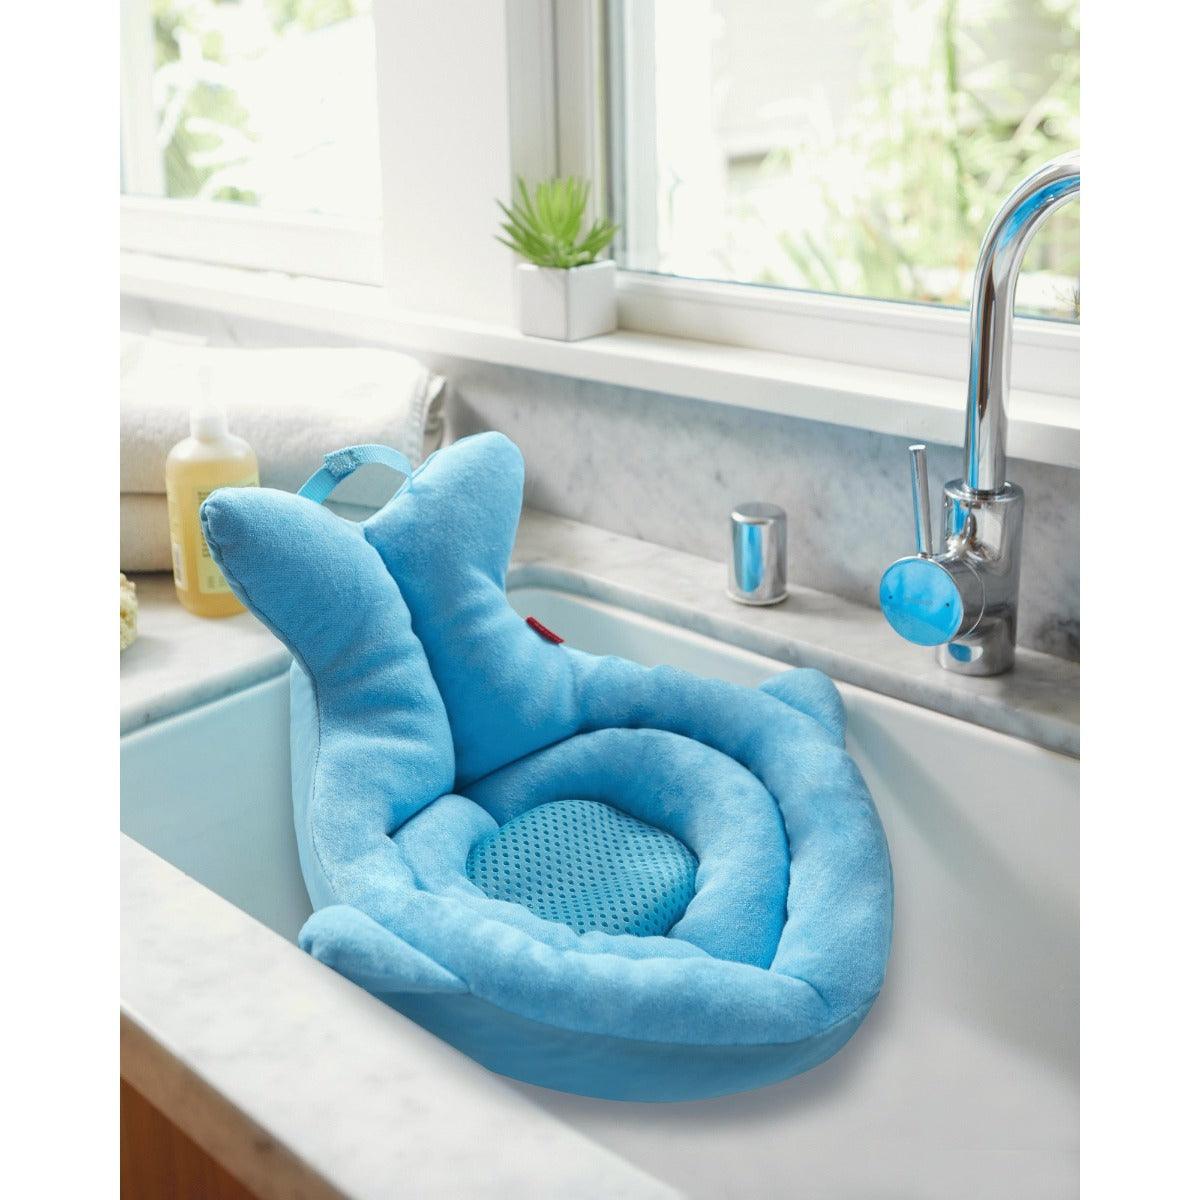 Skip Hop Moby Softspot Sink Bather Blue - Bather For Ages 0-2 Years